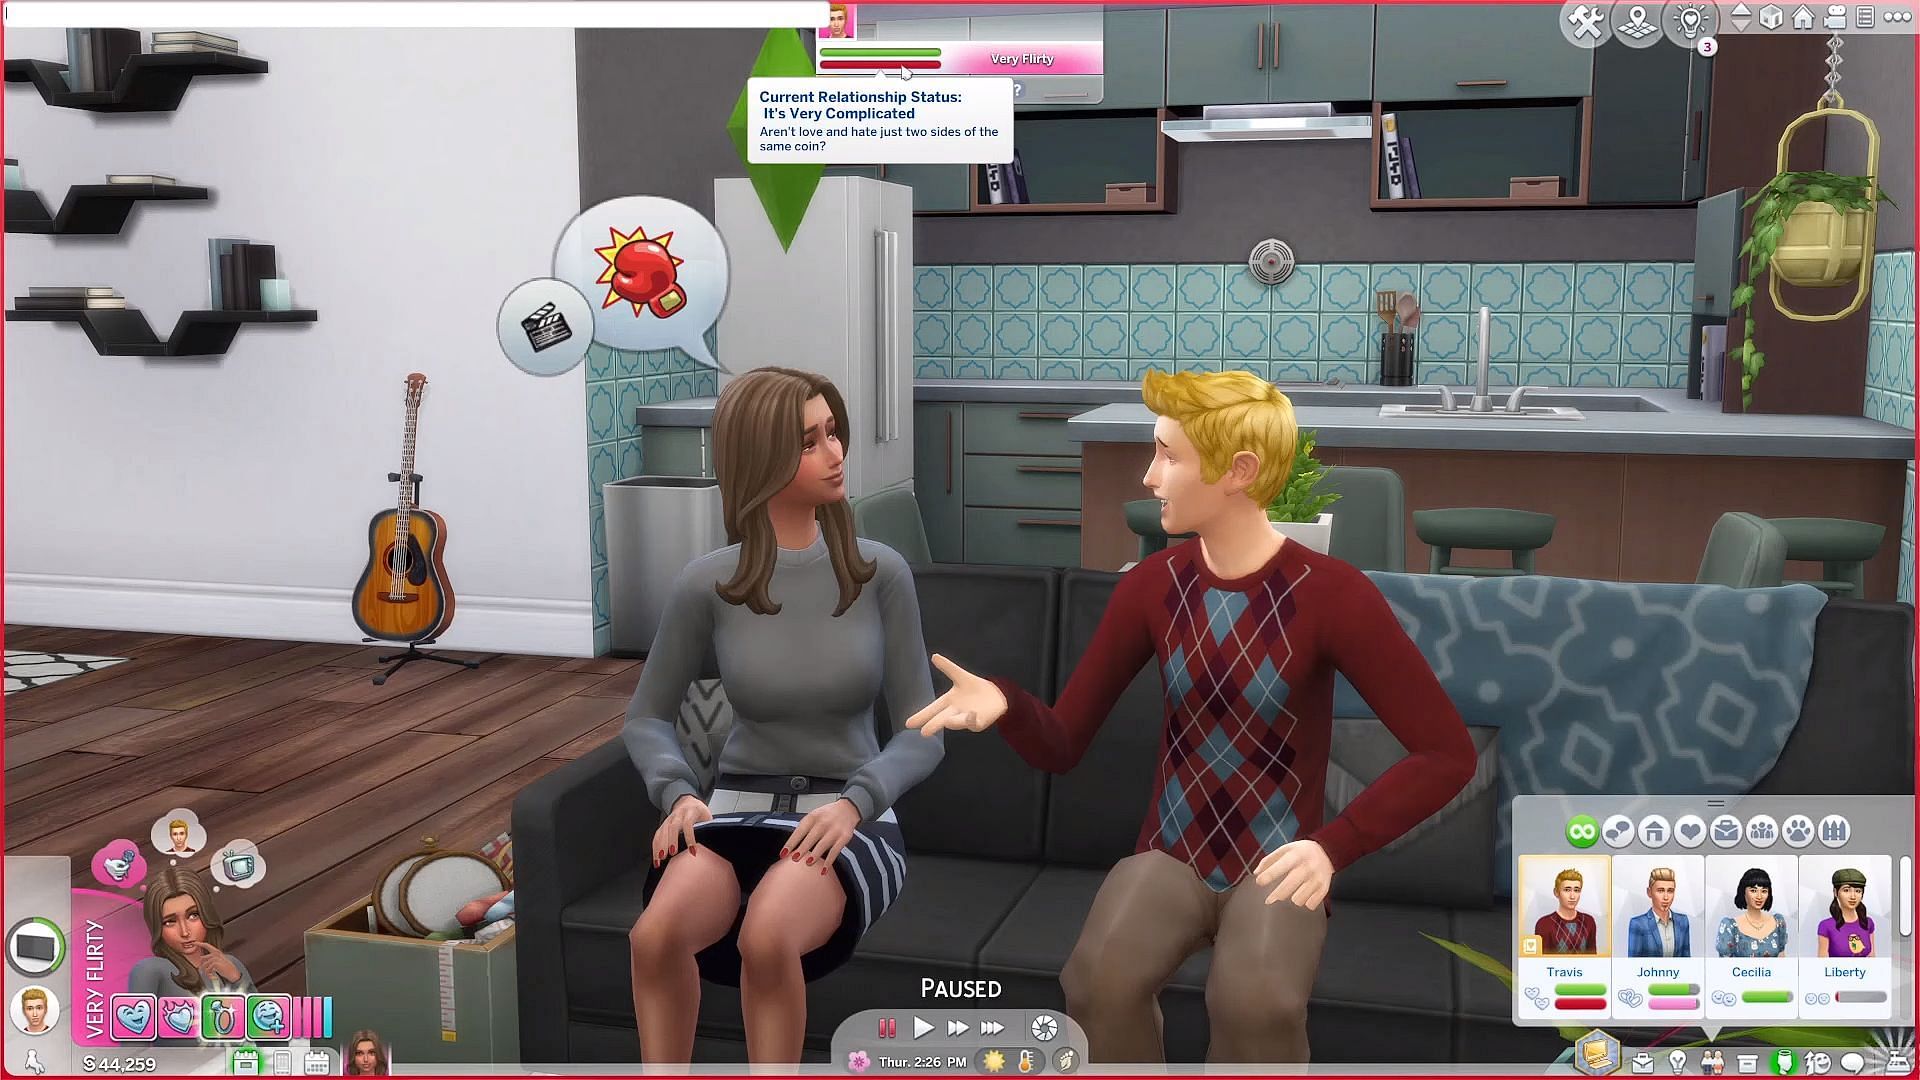 Relationship cheats in the Sims 4 help players save time ingame (Image via Electronic Arts/YouTube-taylorsaurus guides)